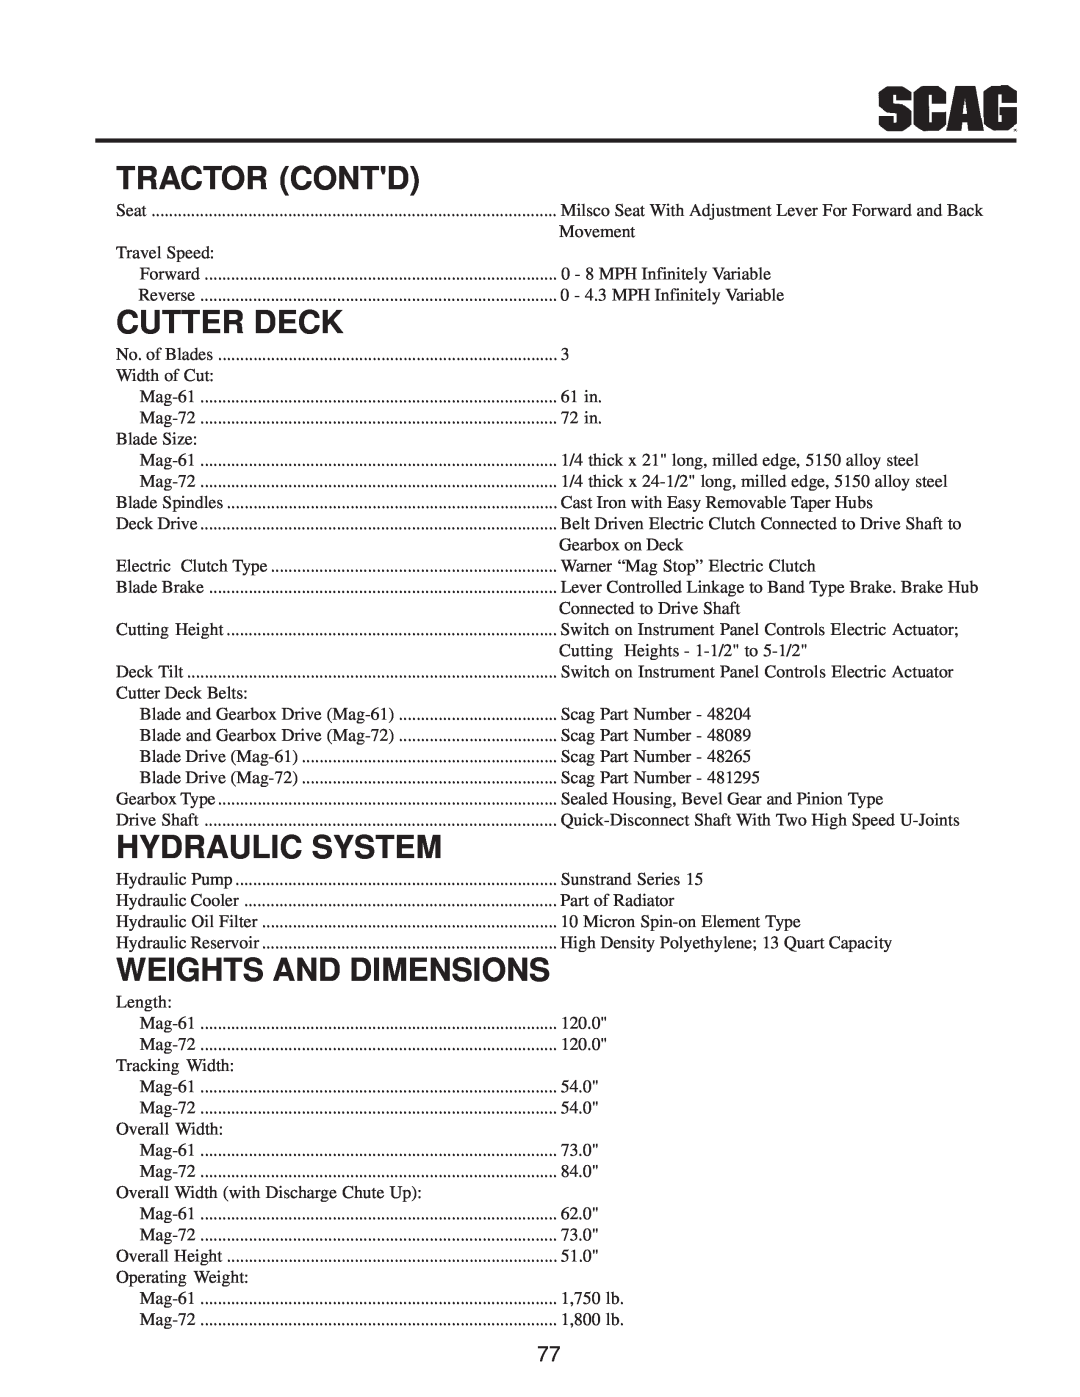 Scag Power Equipment MAG manual Tractor Contd, Cutter Deck, Hydraulic System, Weights And Dimensions 